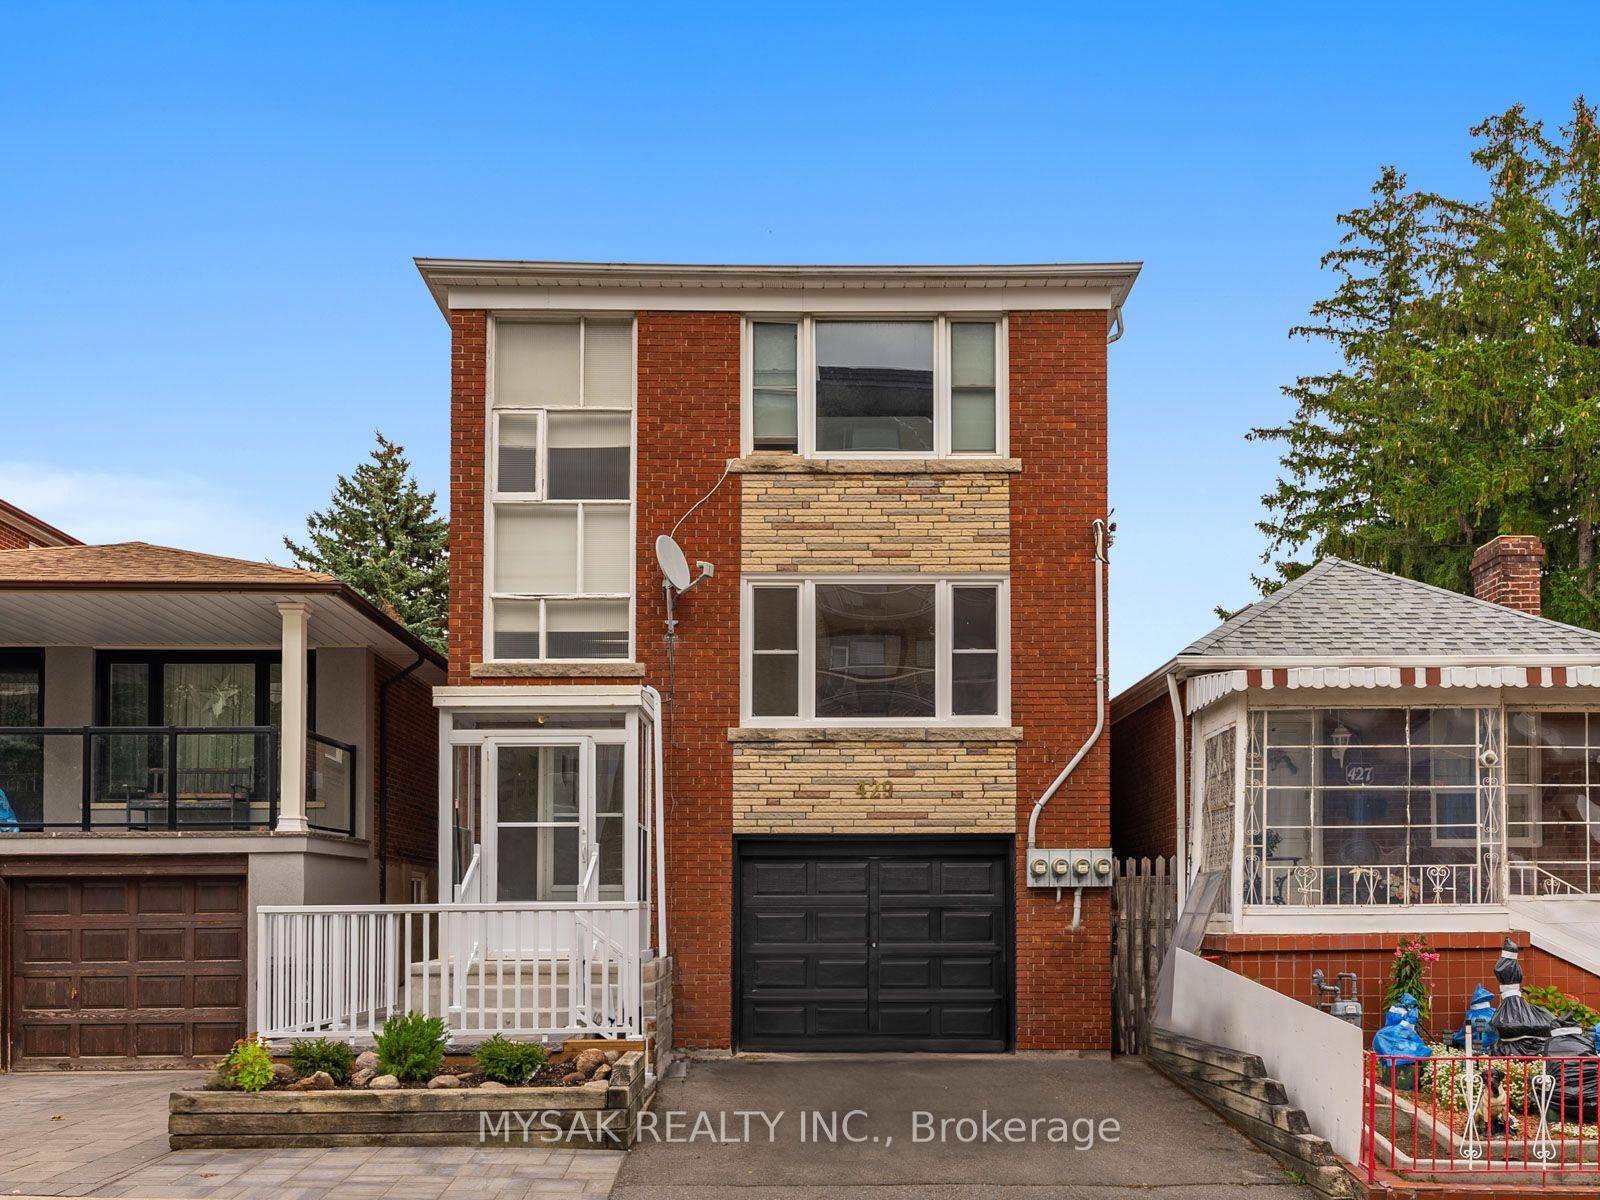 A unique chance to acquire a detached legal triplex nestled in the heart of Oakwood Village, boasting two expansive 2 bedroom units and a large one 1 bedroom unit, all ...